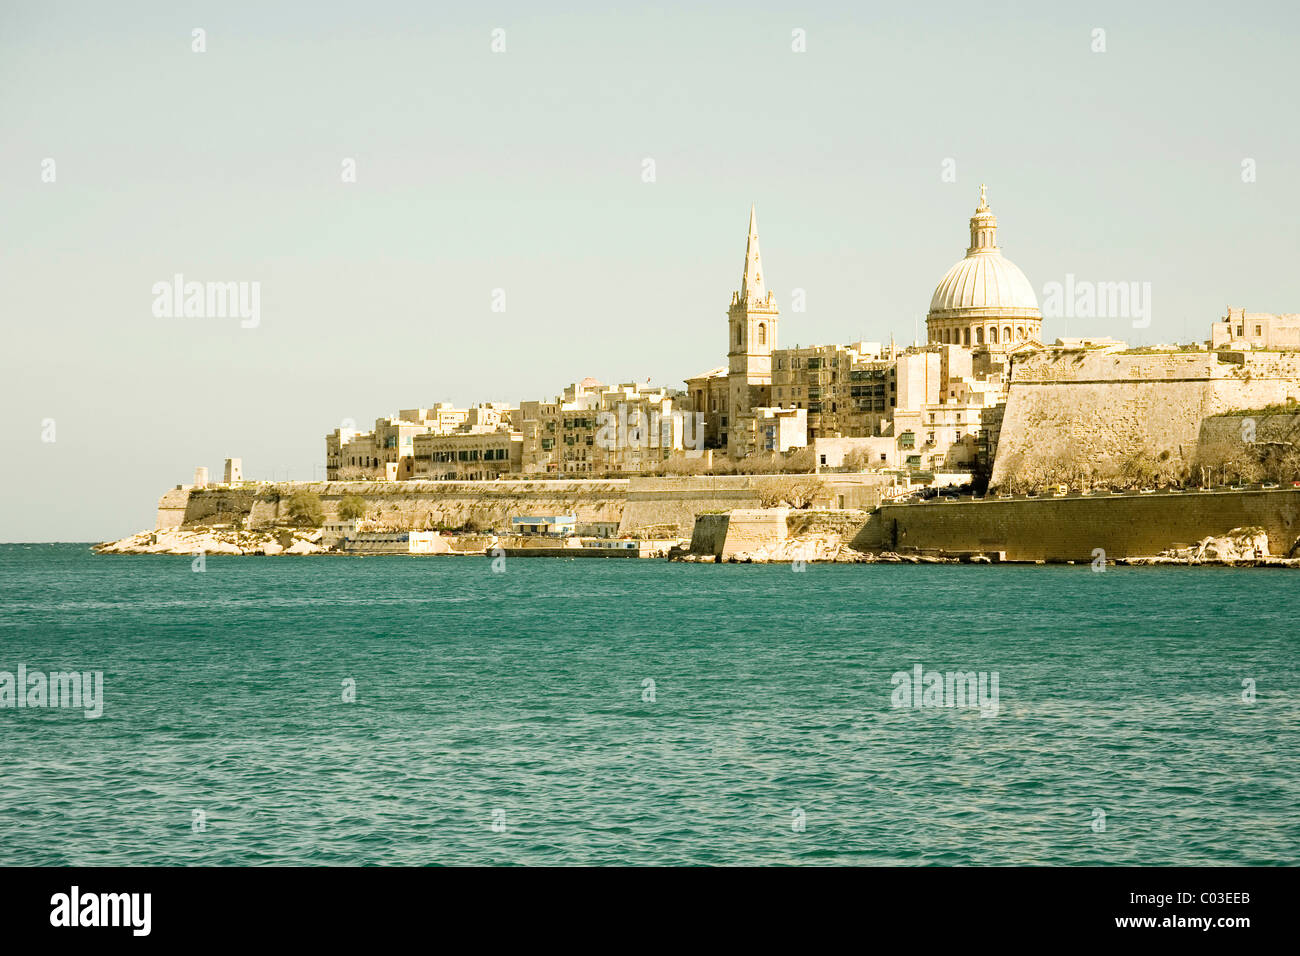 View of the old town of Valletta with St. Paul's Pro-Cathedral, the Carmelite Church and Marsamxett Harbour, Valletta, Malta Stock Photo